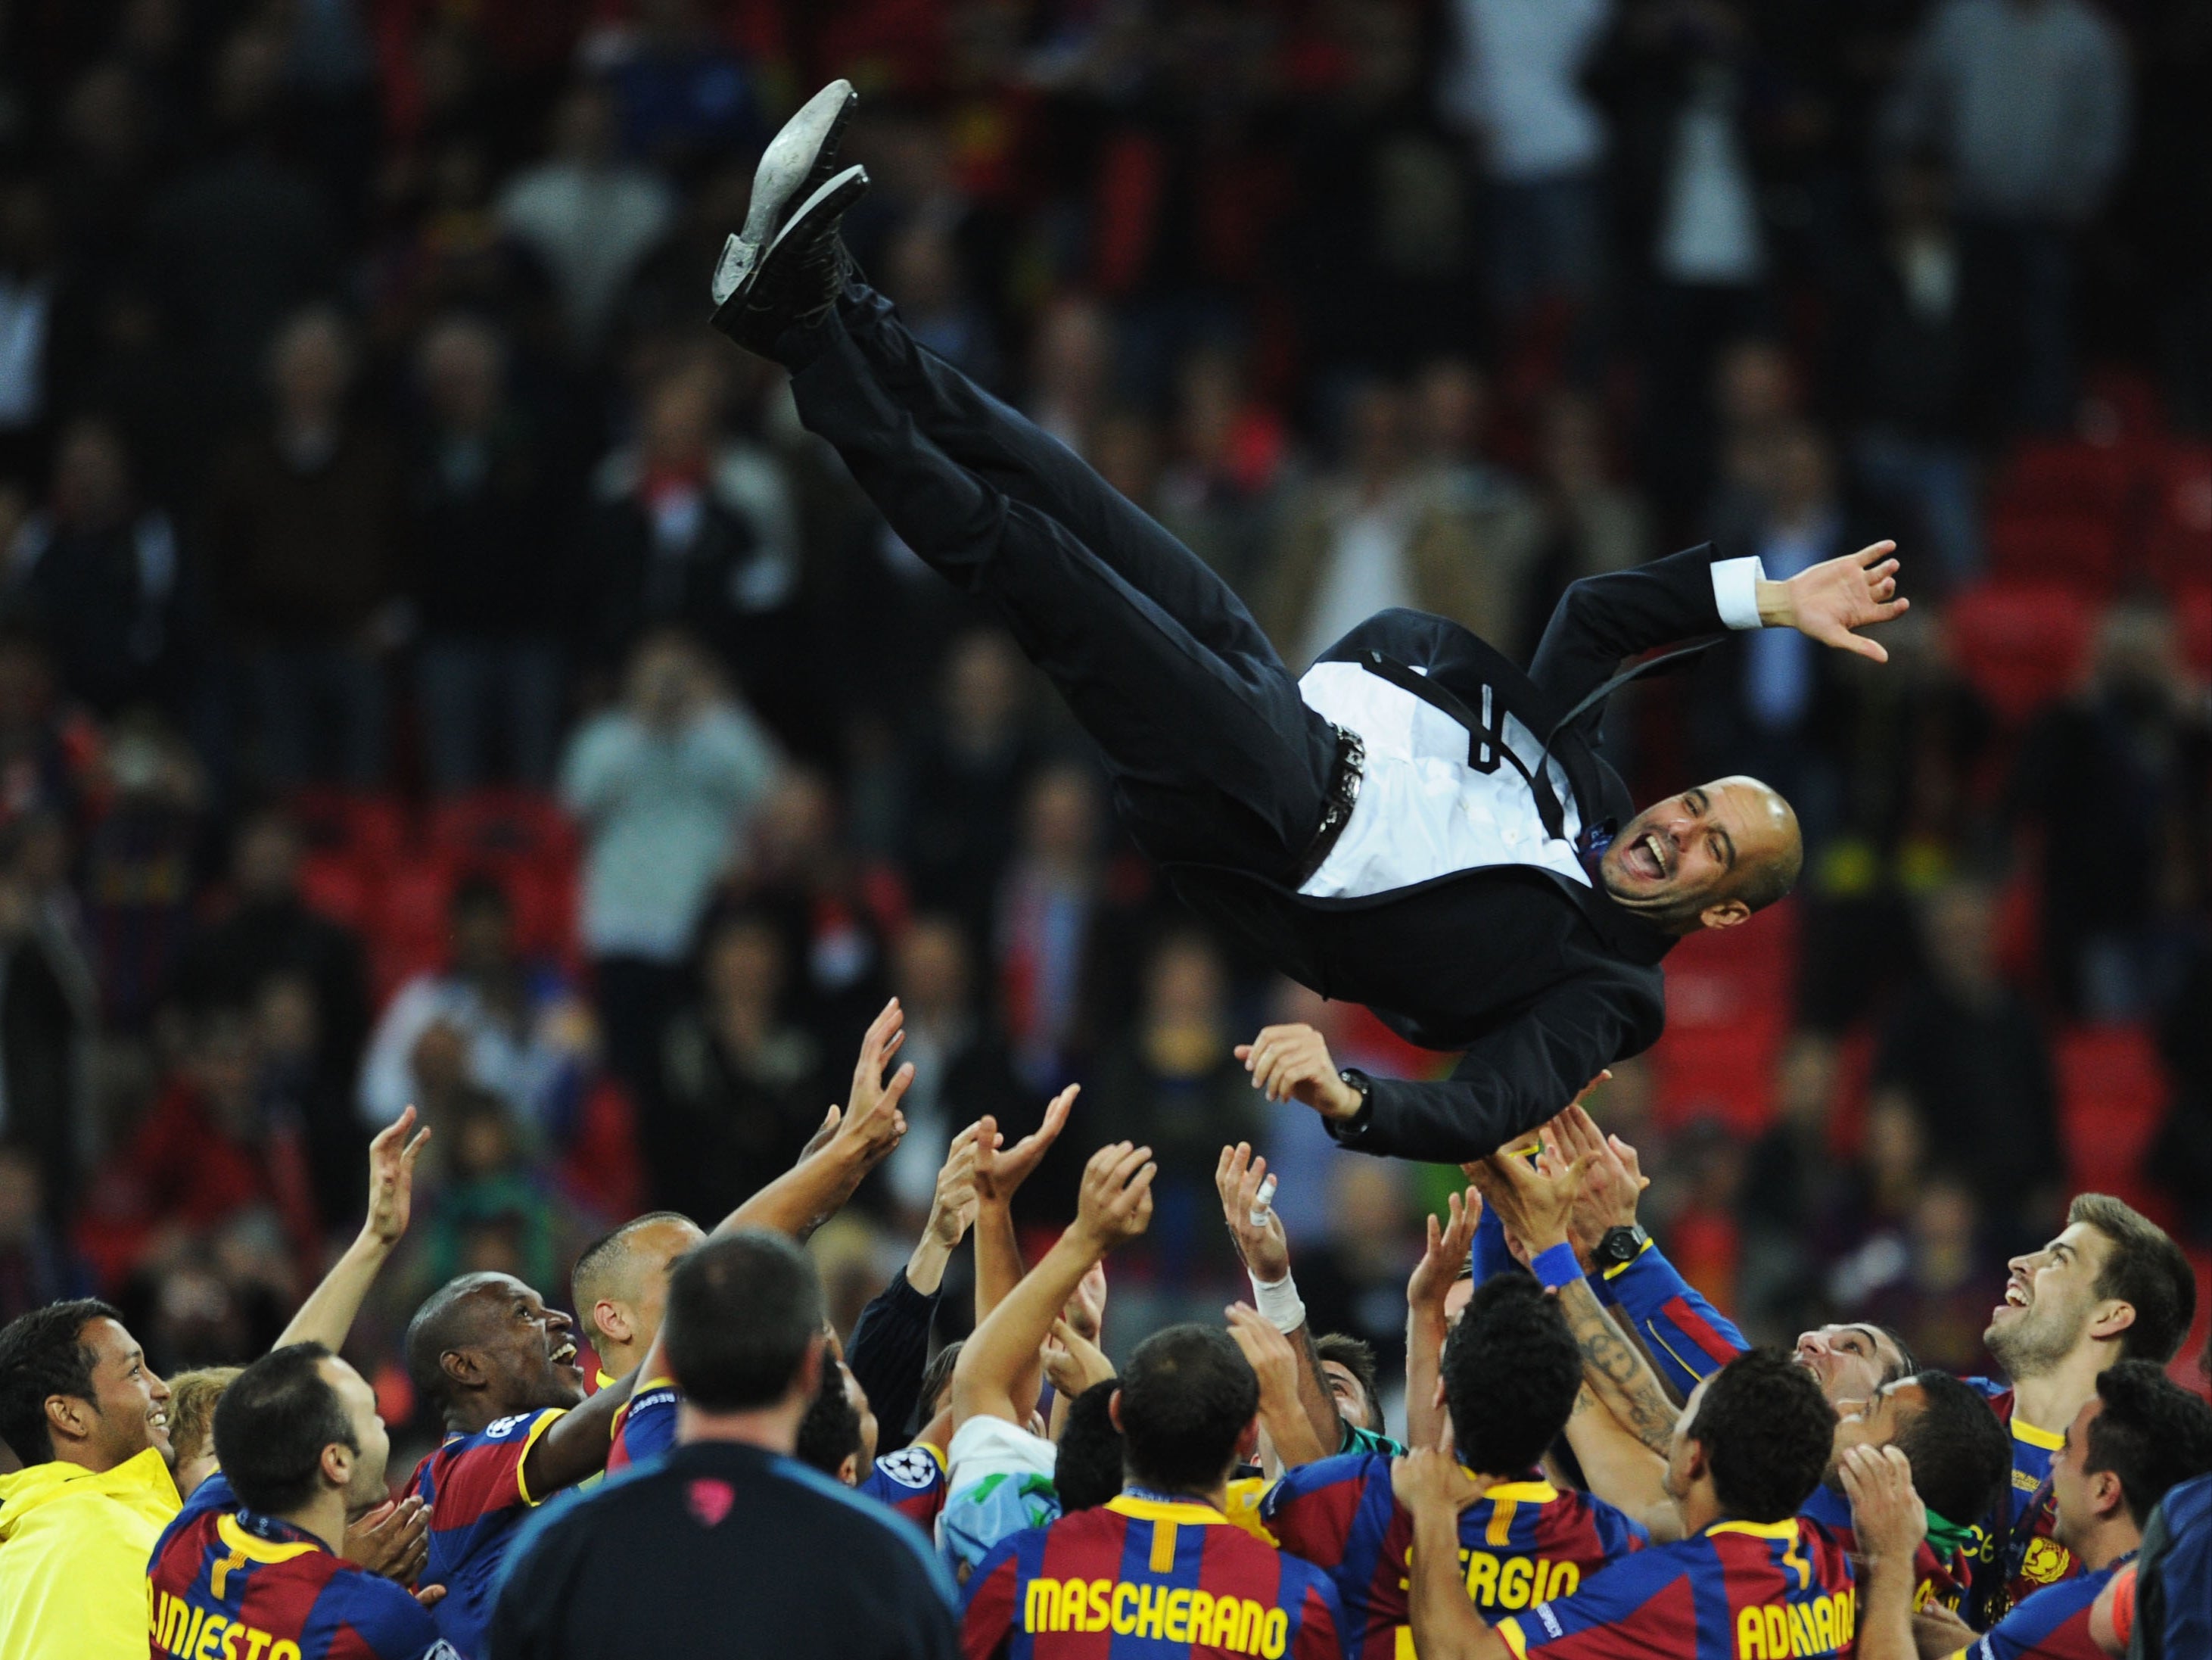 The 2011 win remains Pep Guardiola’s crowning achievement